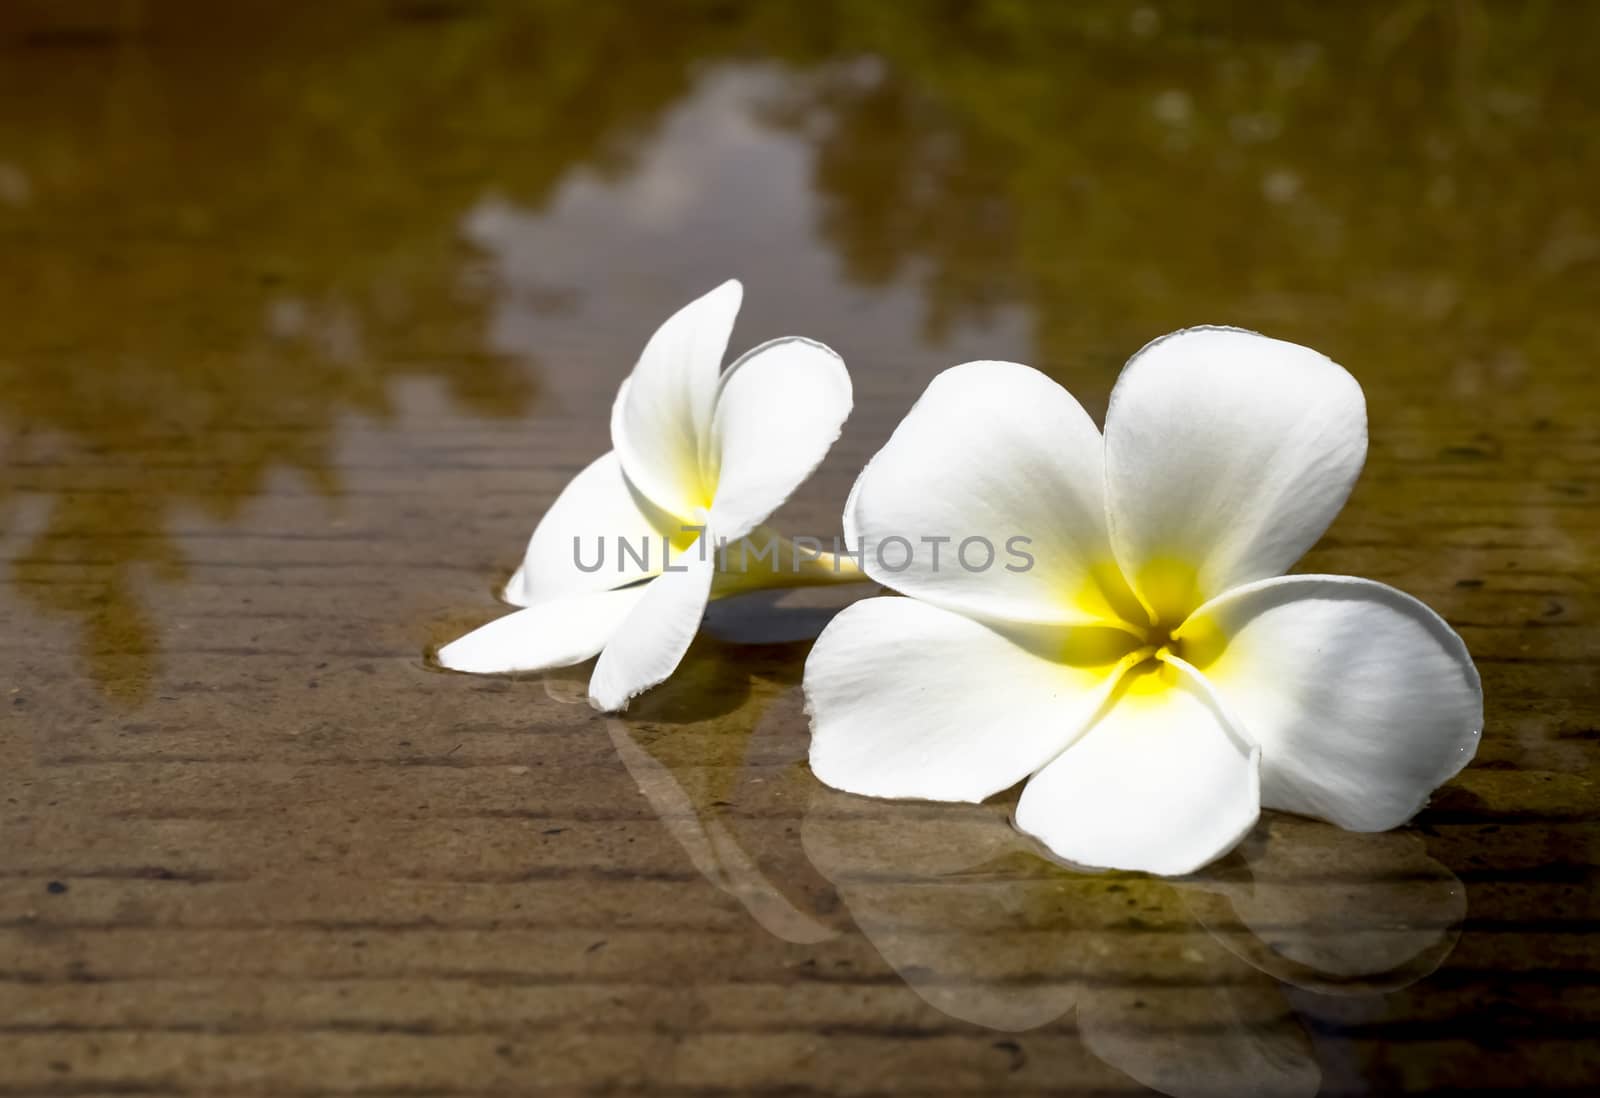 Two flowers placed on the water. Of cement floor